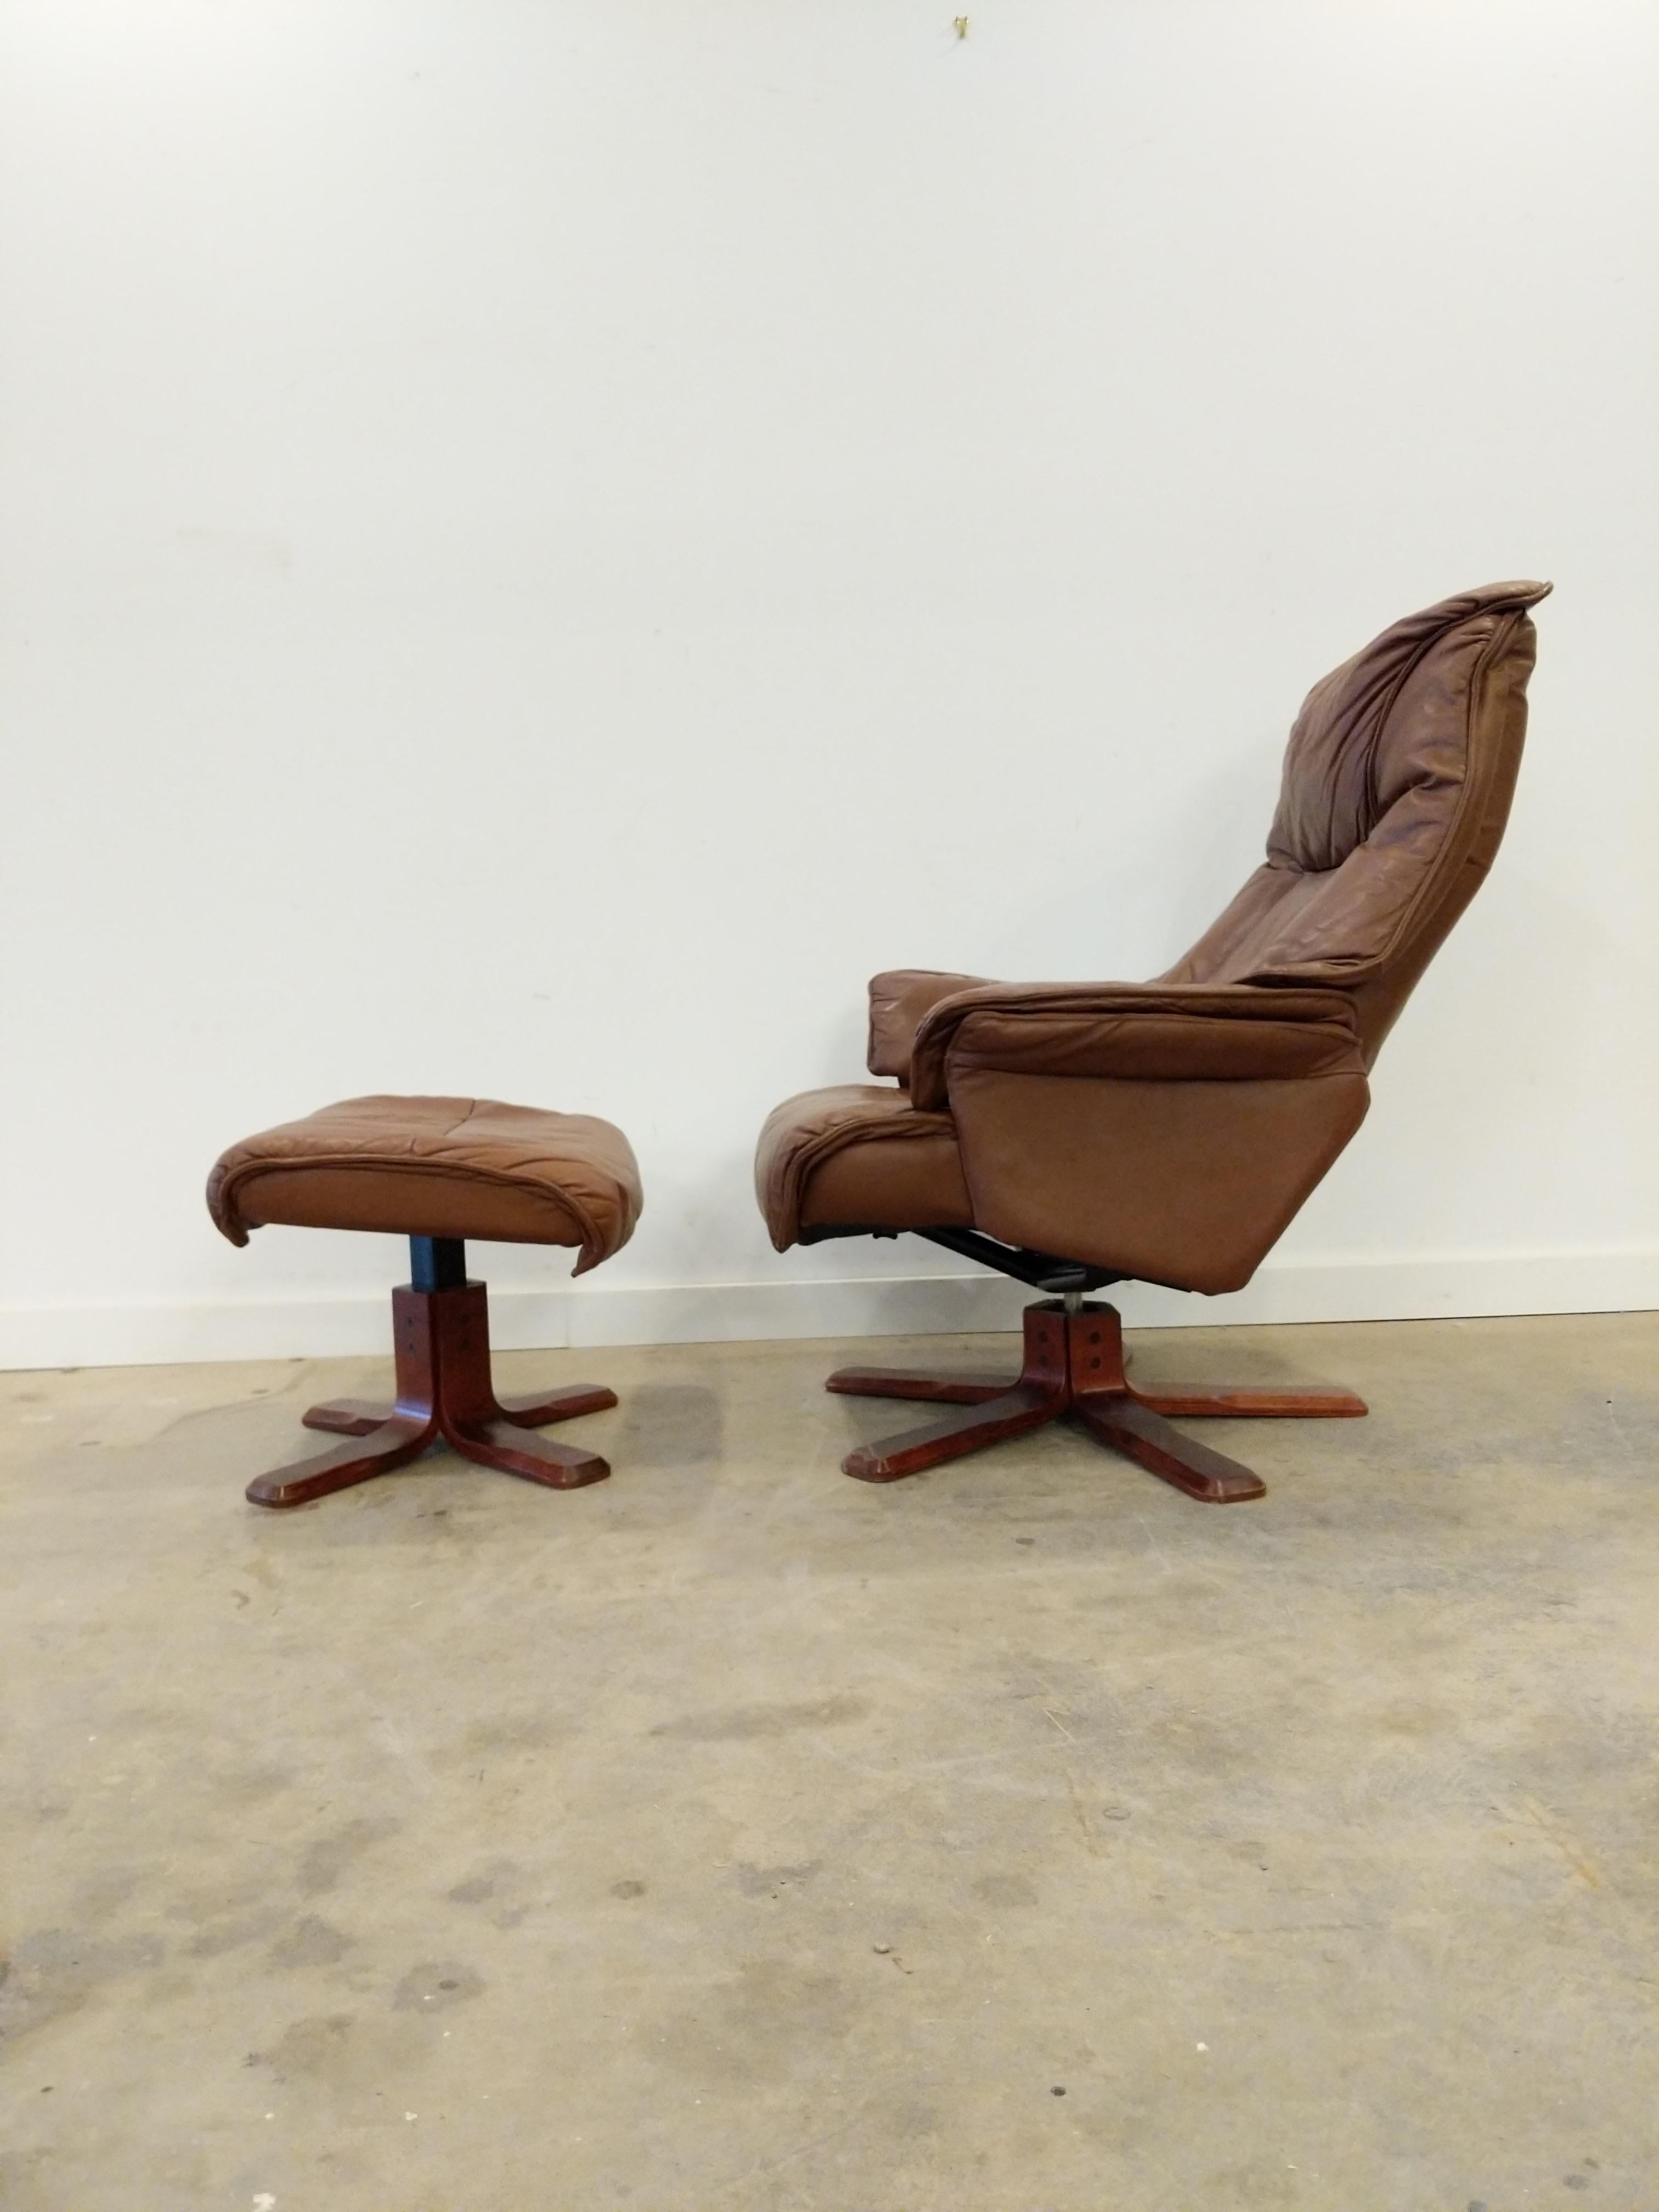 Authentic vintage mid century Danish / Scandinavian Modern leather lounge chair / recliner with footstool.

This set is in excellent vintage condition.

If you would like any additional details, please contact us.

Dimensions:
Chair:
39” tall to